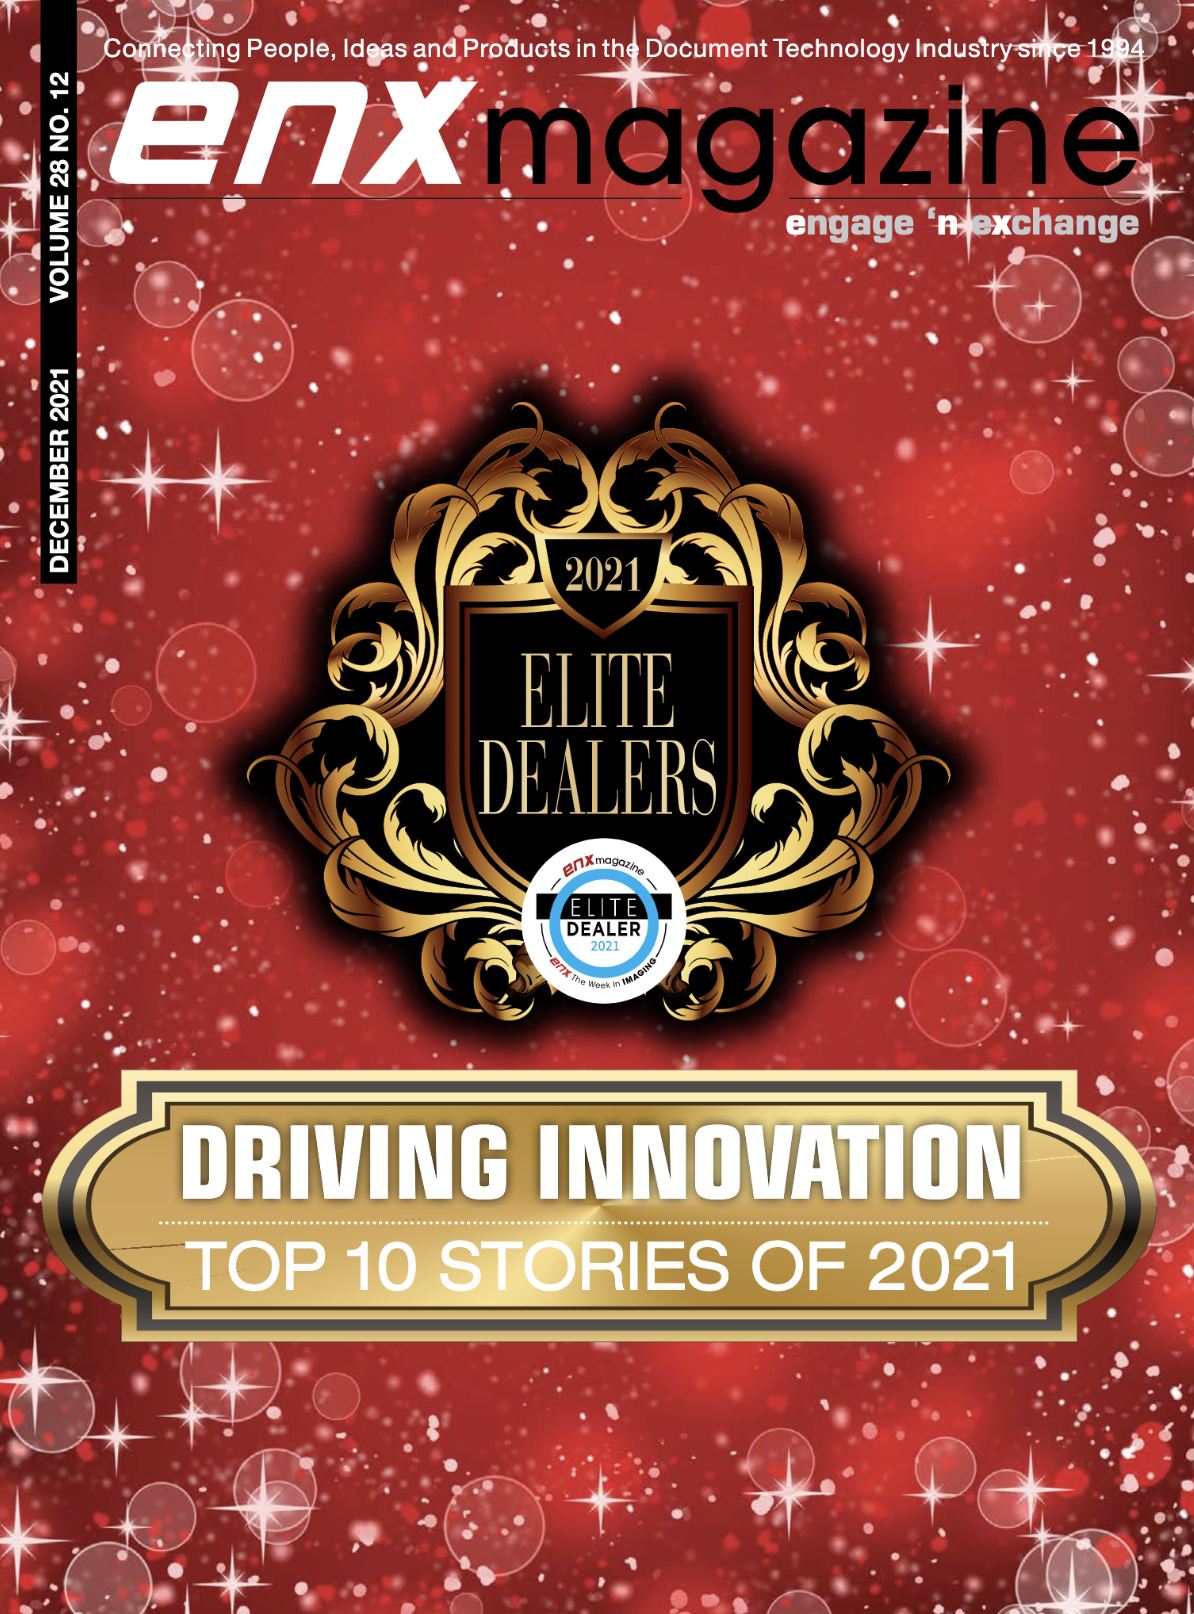 DOING BETTER BUSINESS SELECTED AS ELITE DEALER 21 YEARS IN A ROW!